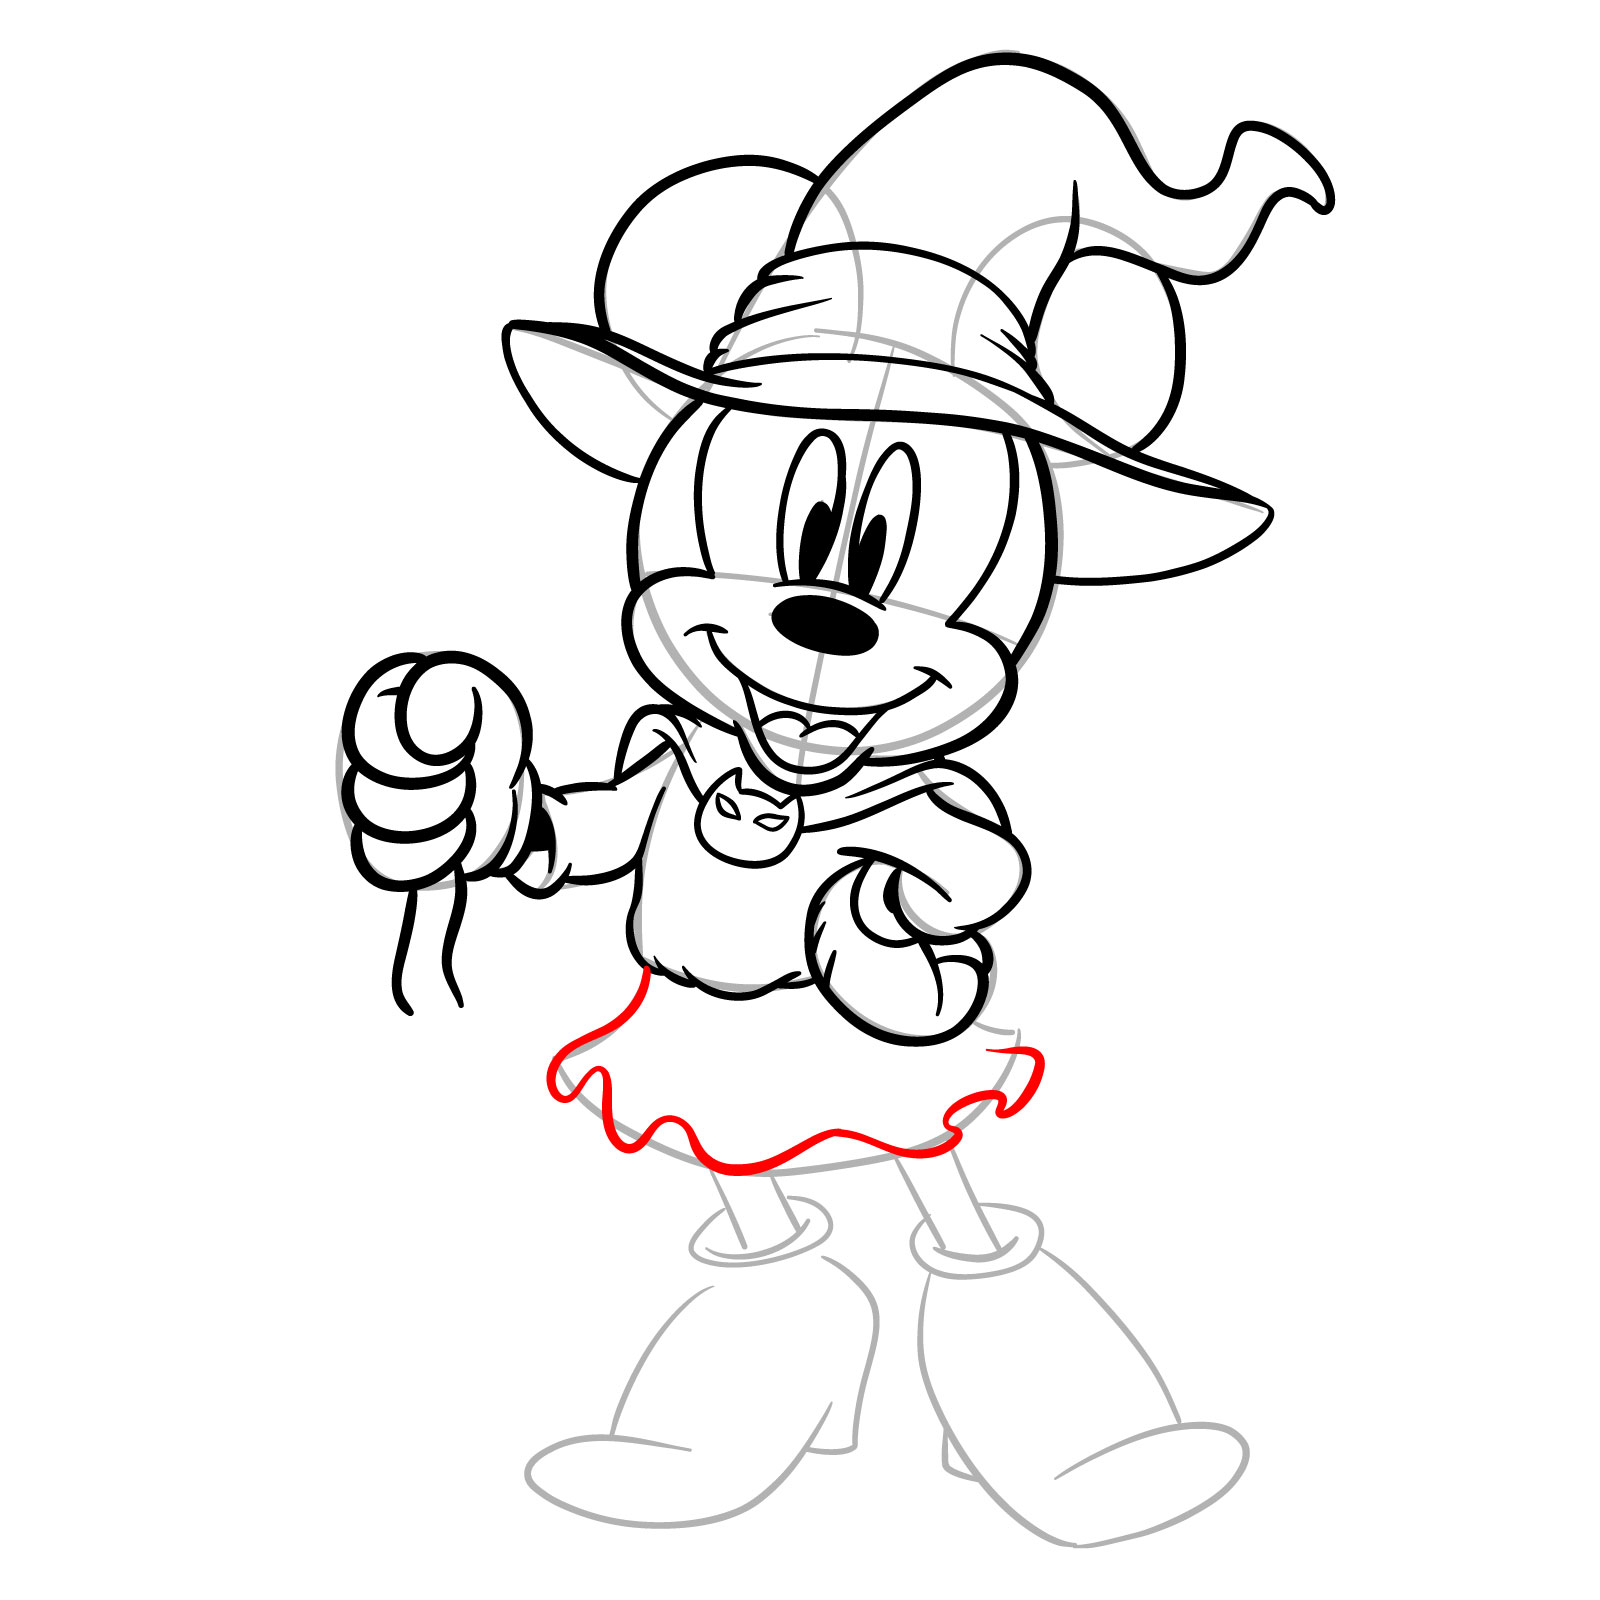 How to draw Halloween Minnie Mouse as a witch - step 23